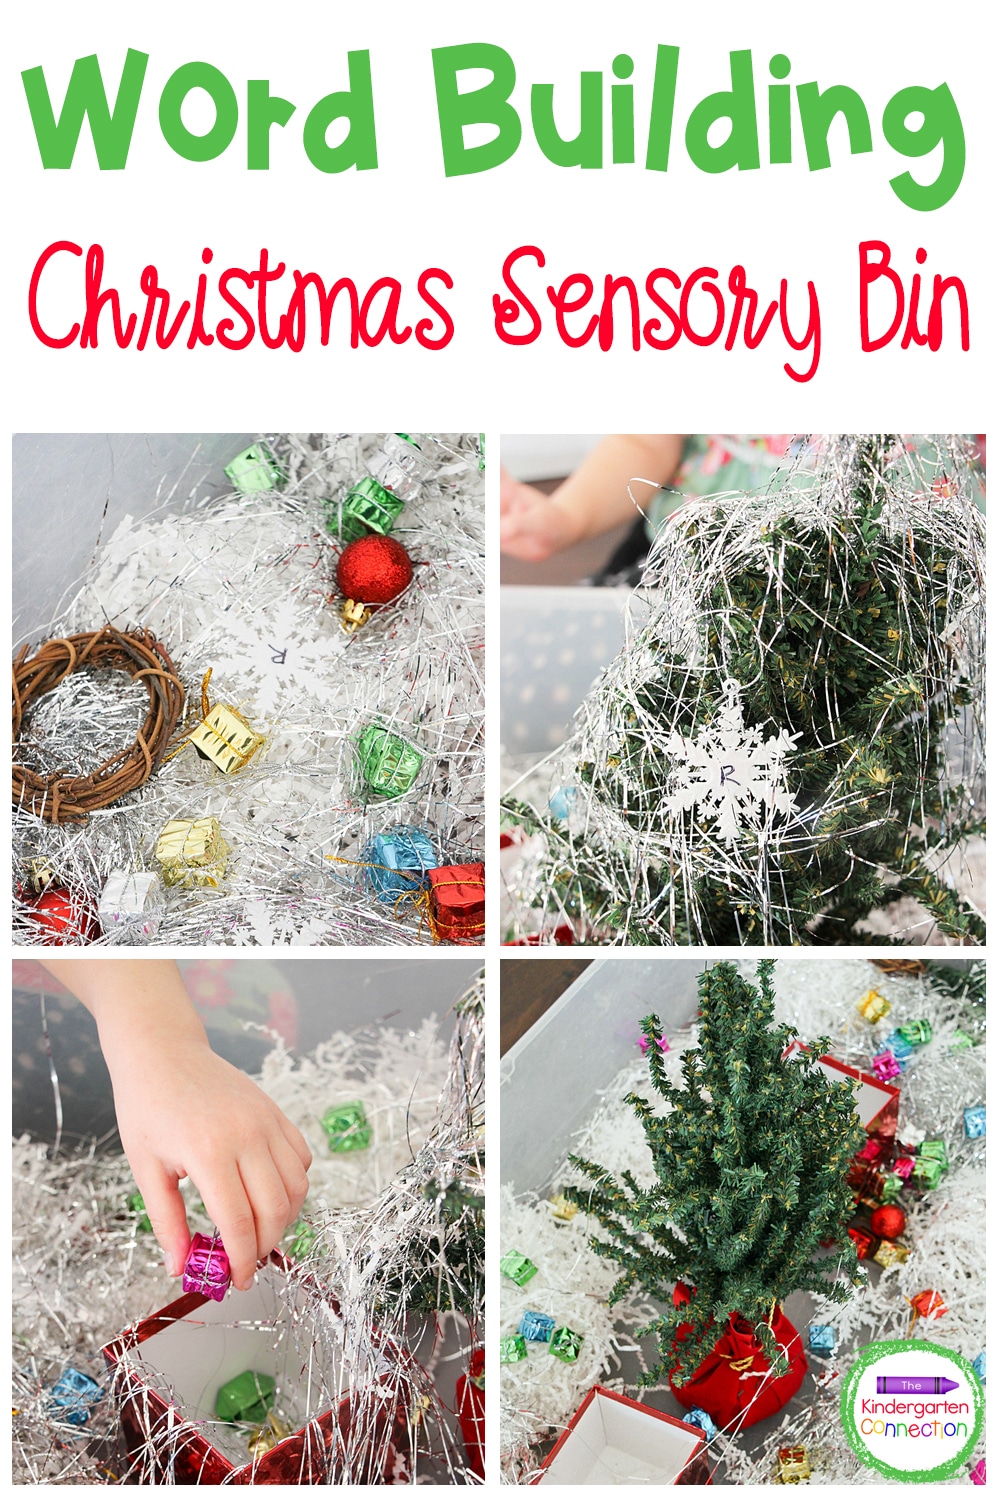 Work on letter identification and early reading skills in Pre-K and Kindergarten with this fun word building Christmas sensory bin!